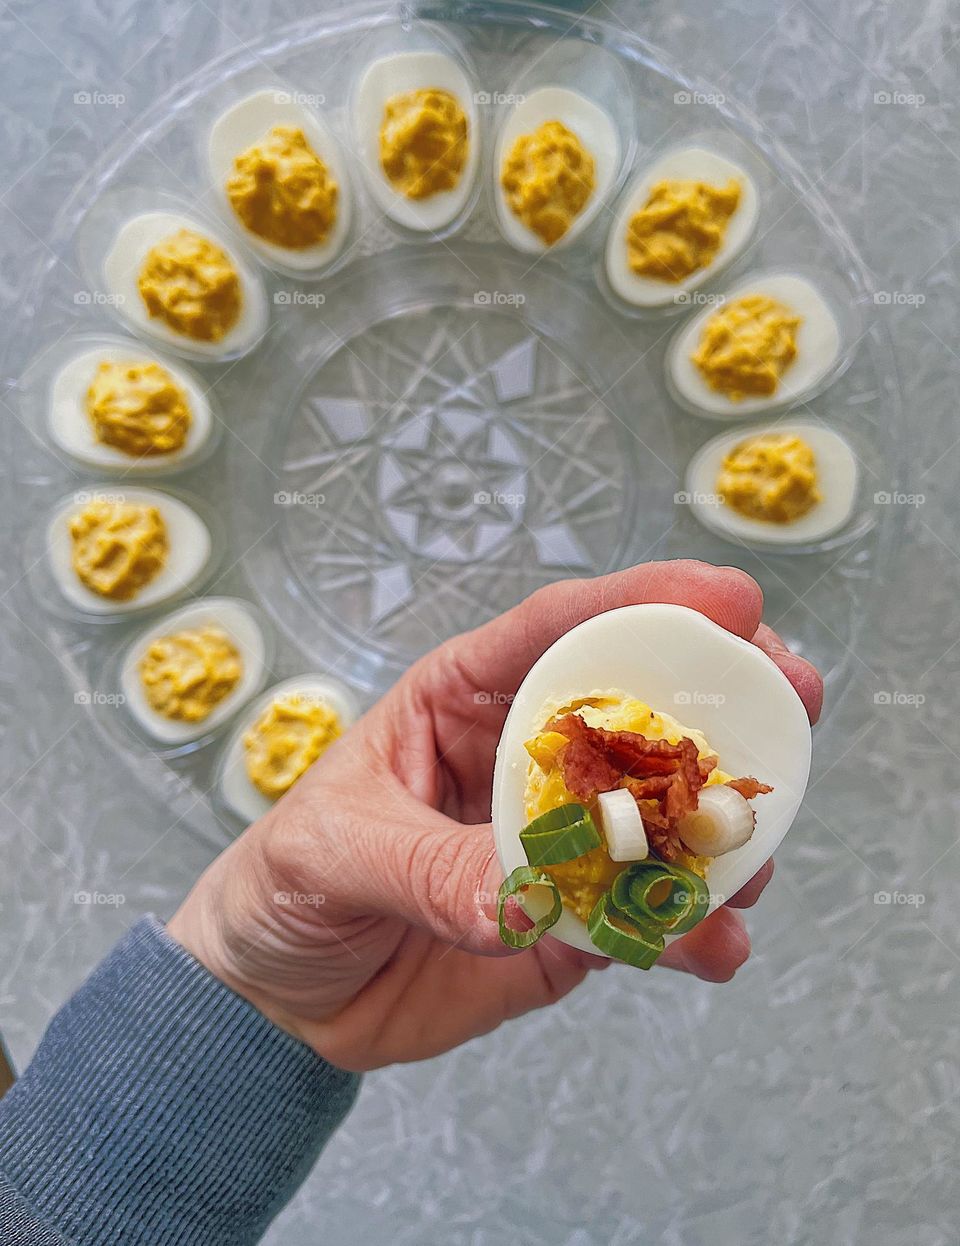 Woman eating deviled eggs, deviled eggs on an egg plate, woman holding deviled egg in her hands, looking down at the appetizer, eating the delicious recipe, appetizer for dinner party, favorite foods 